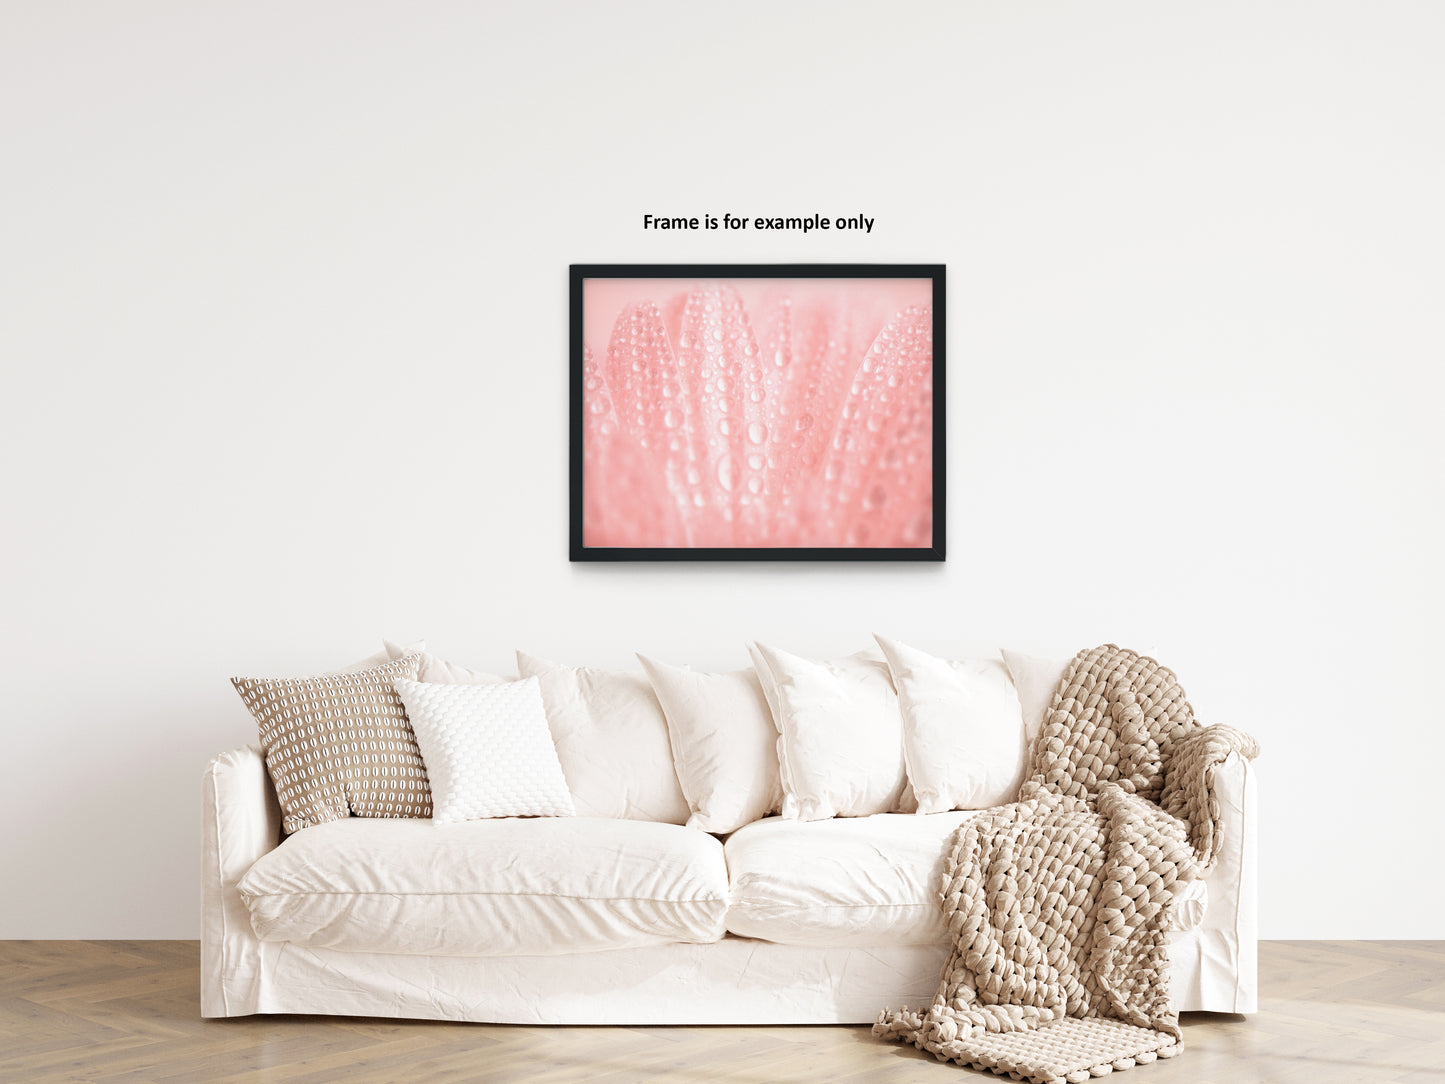 Living Room Amazon Wall Decor: Serenity Close-up Pink Daisy Floral Botanical Photograph Shabby Chic - Vintage Loose / Unframed Wall Art print